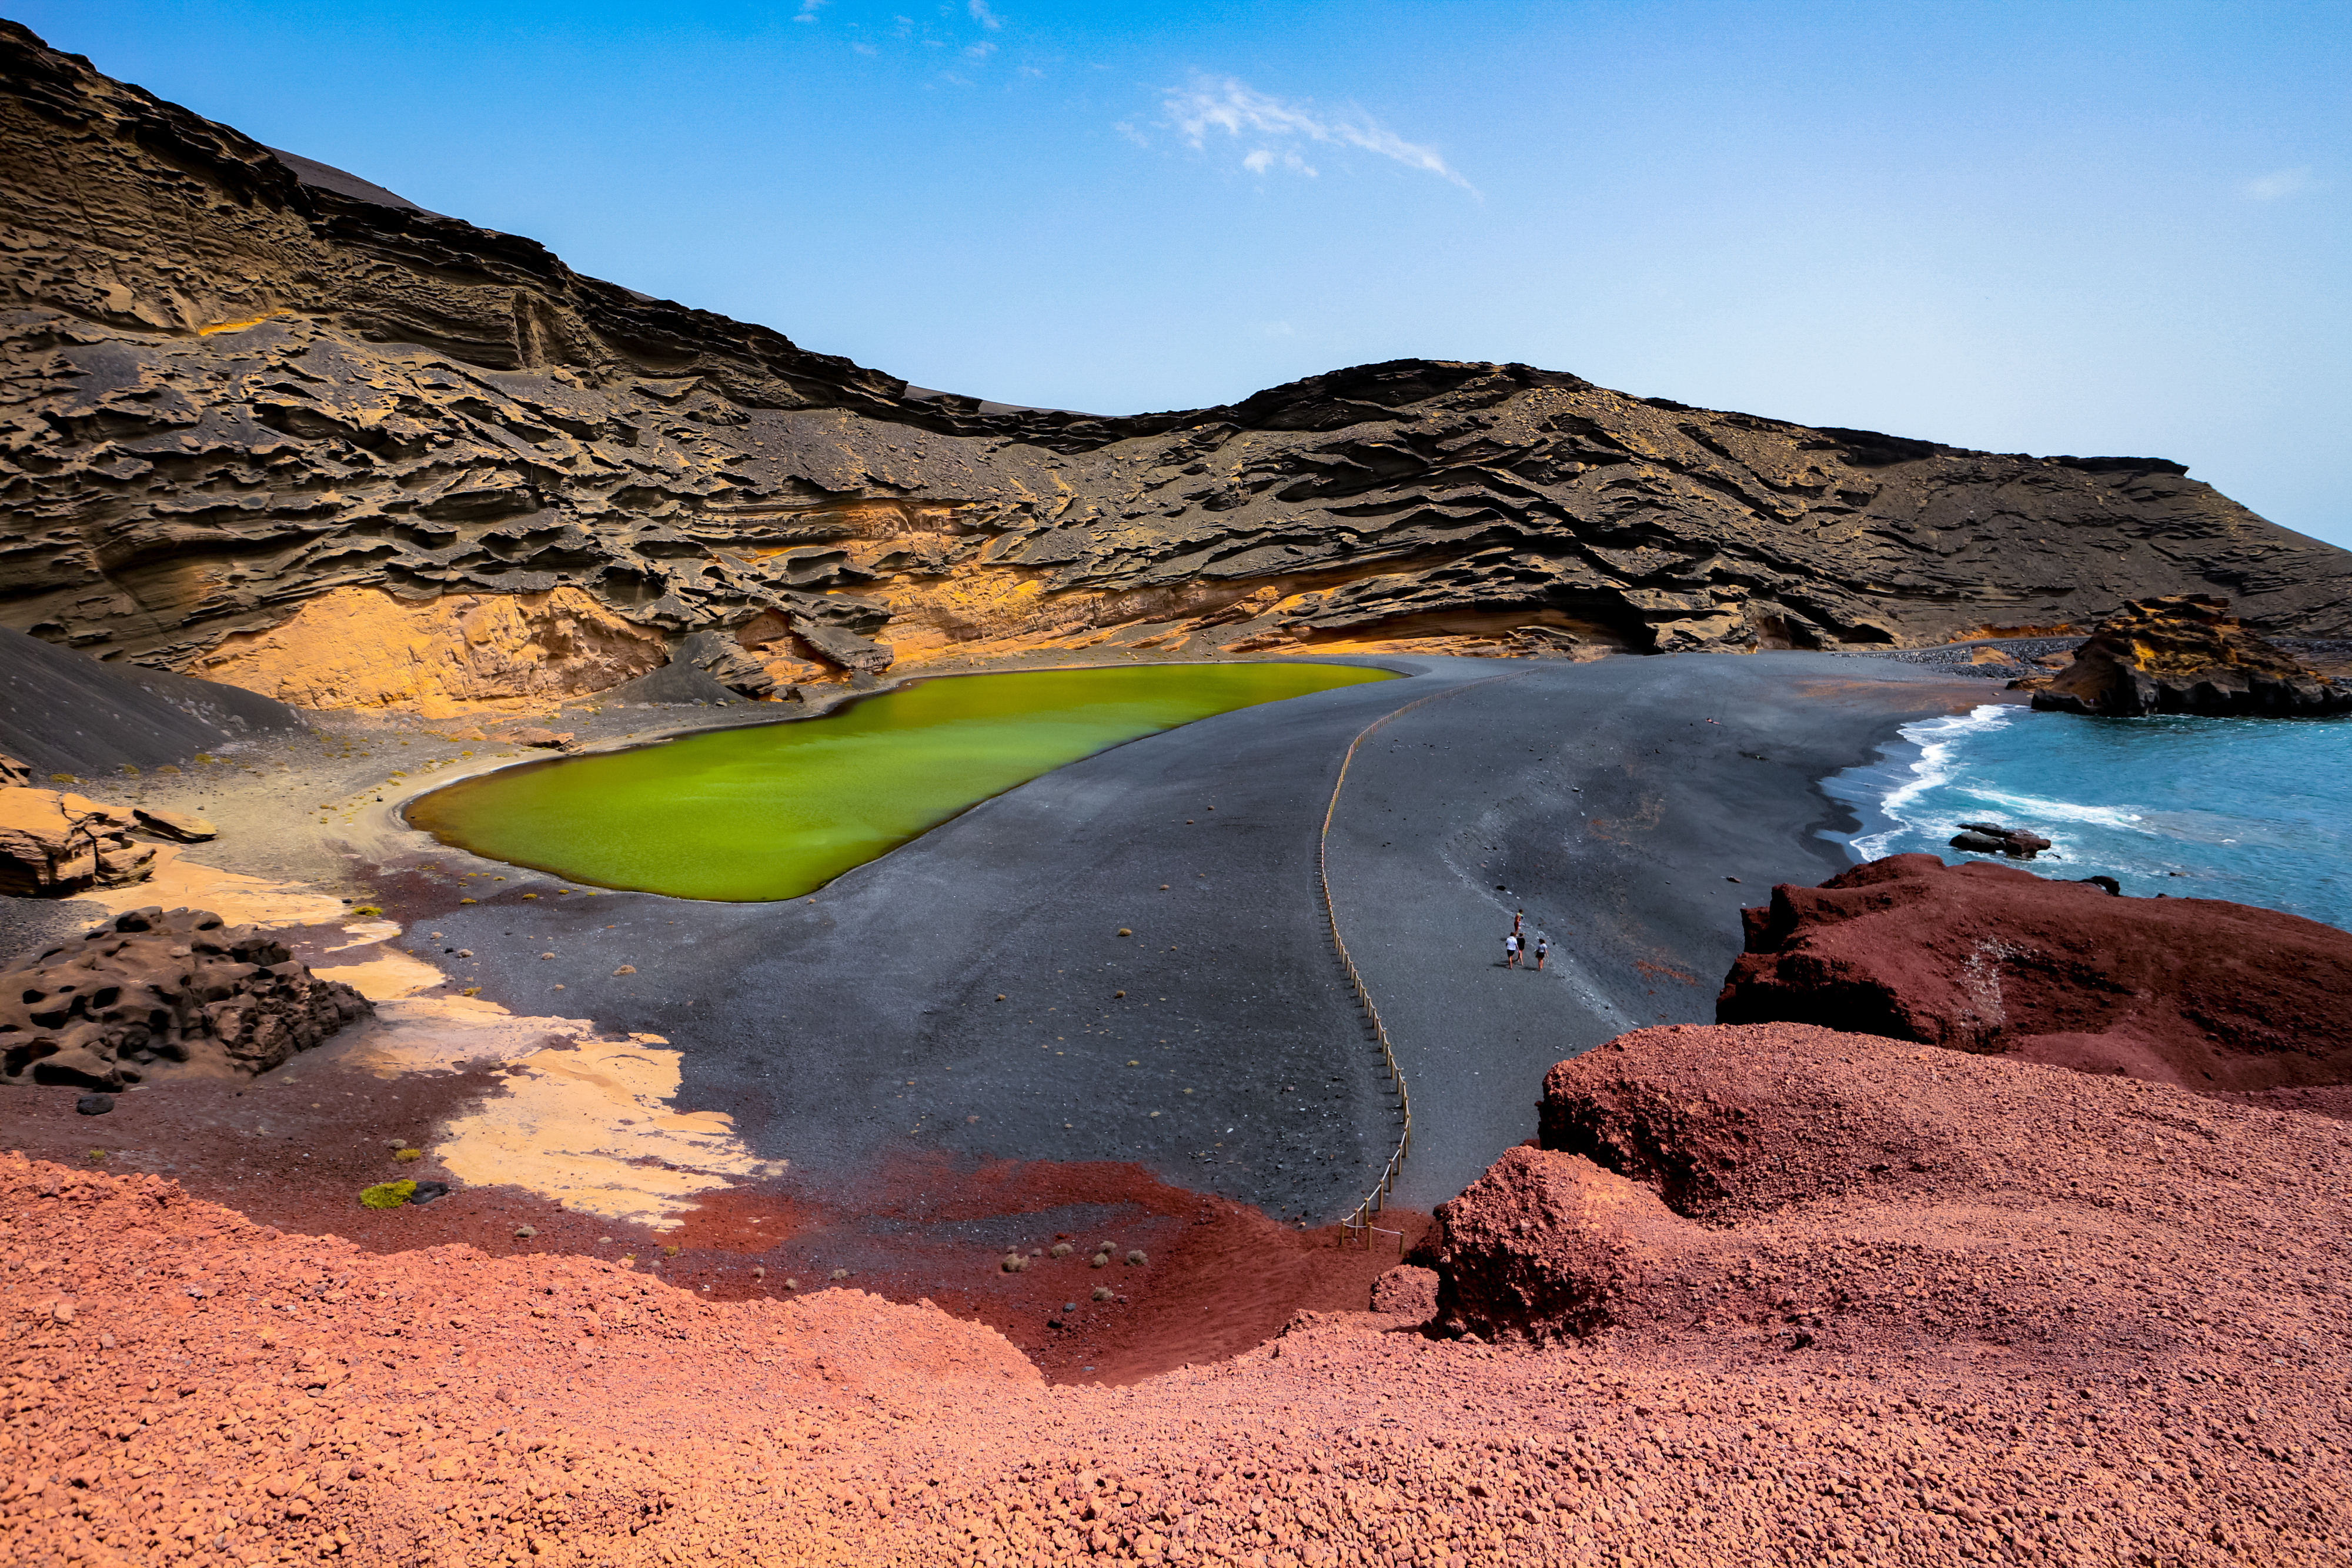 Lago Verde ("Green Lake") or Charco de Los Clicos in El Golfo, Lanzarote, Canary Islands, Spain. Uniquely colorful landscape with black sand beach, dark volcanic rocks and red earth.